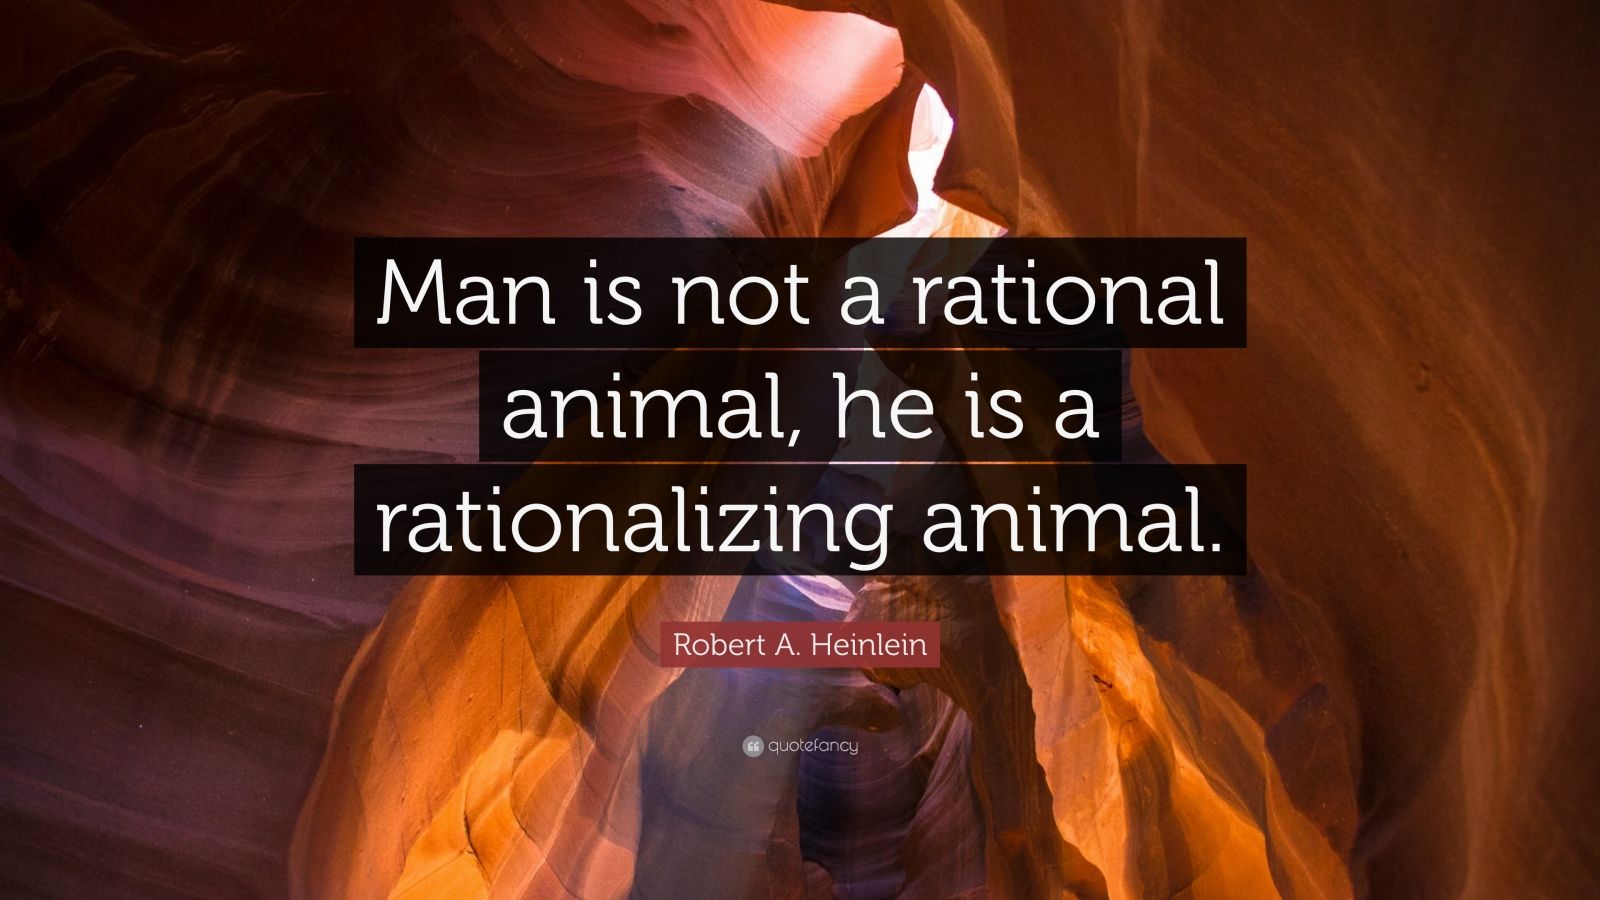 Robert A. Heinlein Quote: “Man is not a rational animal, he is a  rationalizing animal.”